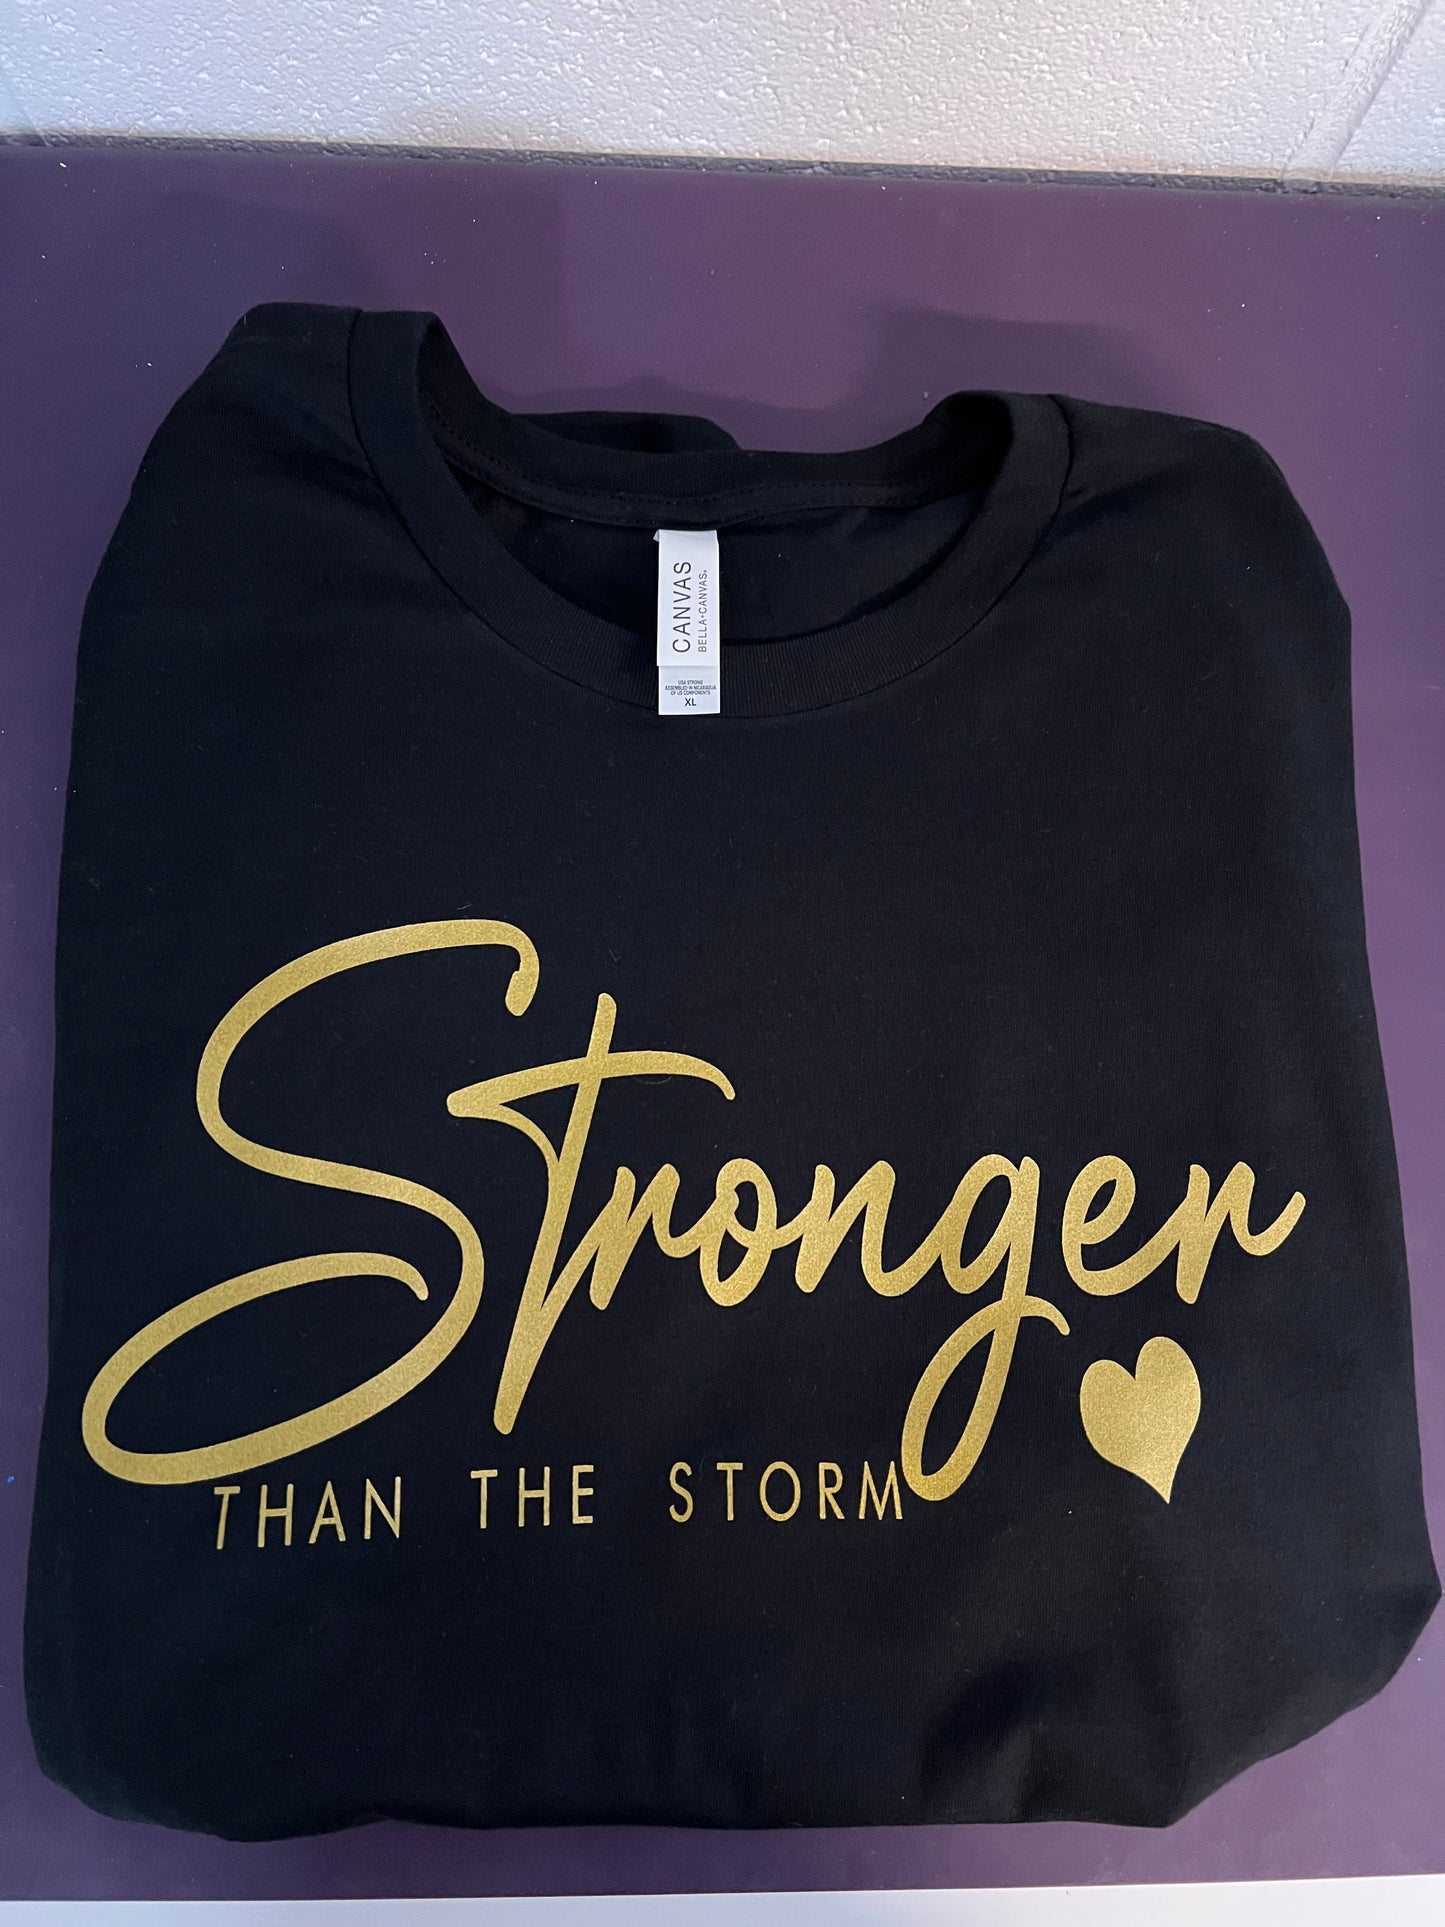 Stronger Than The Storm